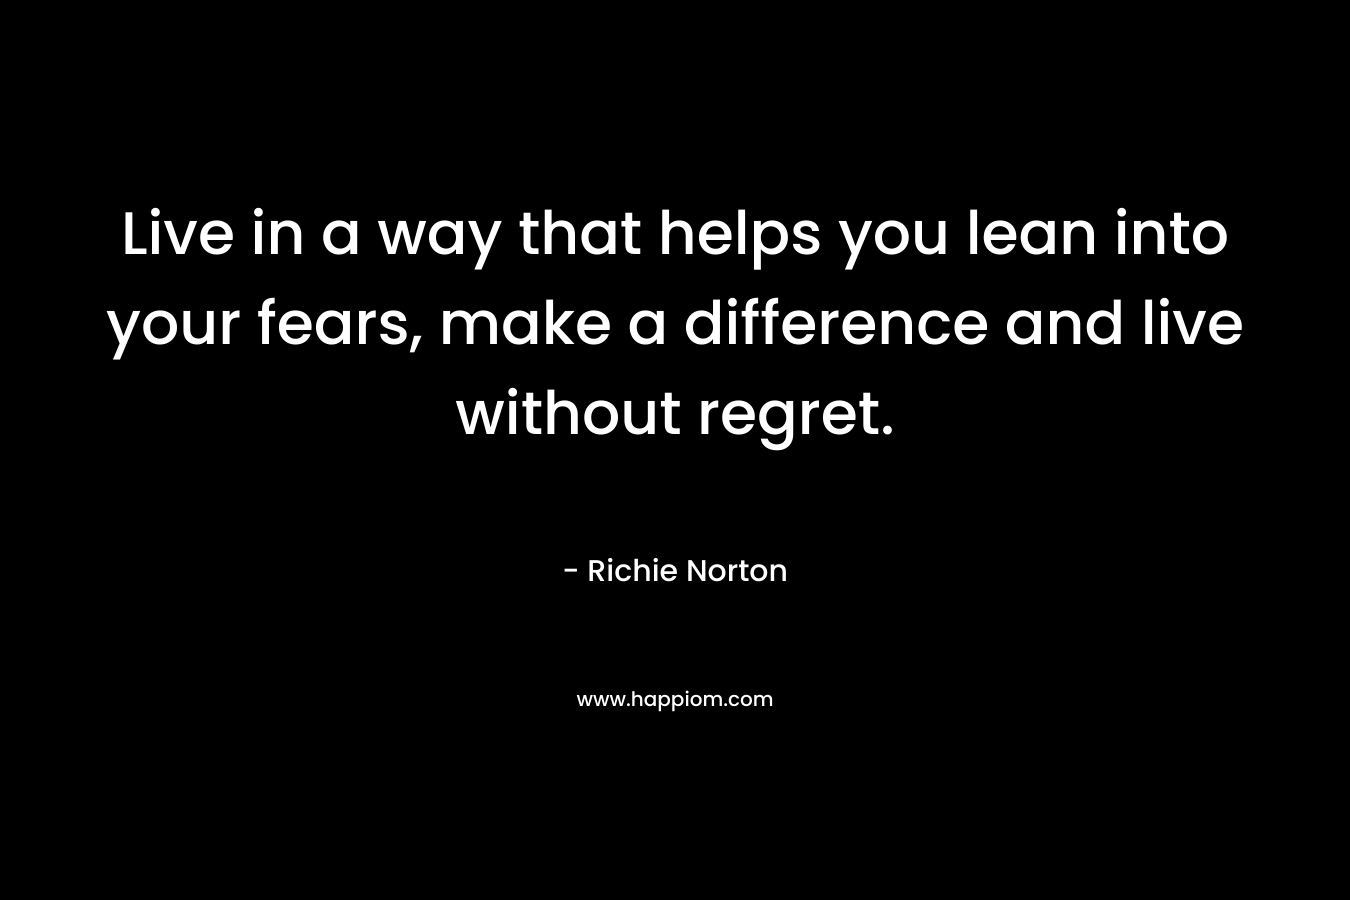 Live in a way that helps you lean into your fears, make a difference and live without regret. – Richie Norton